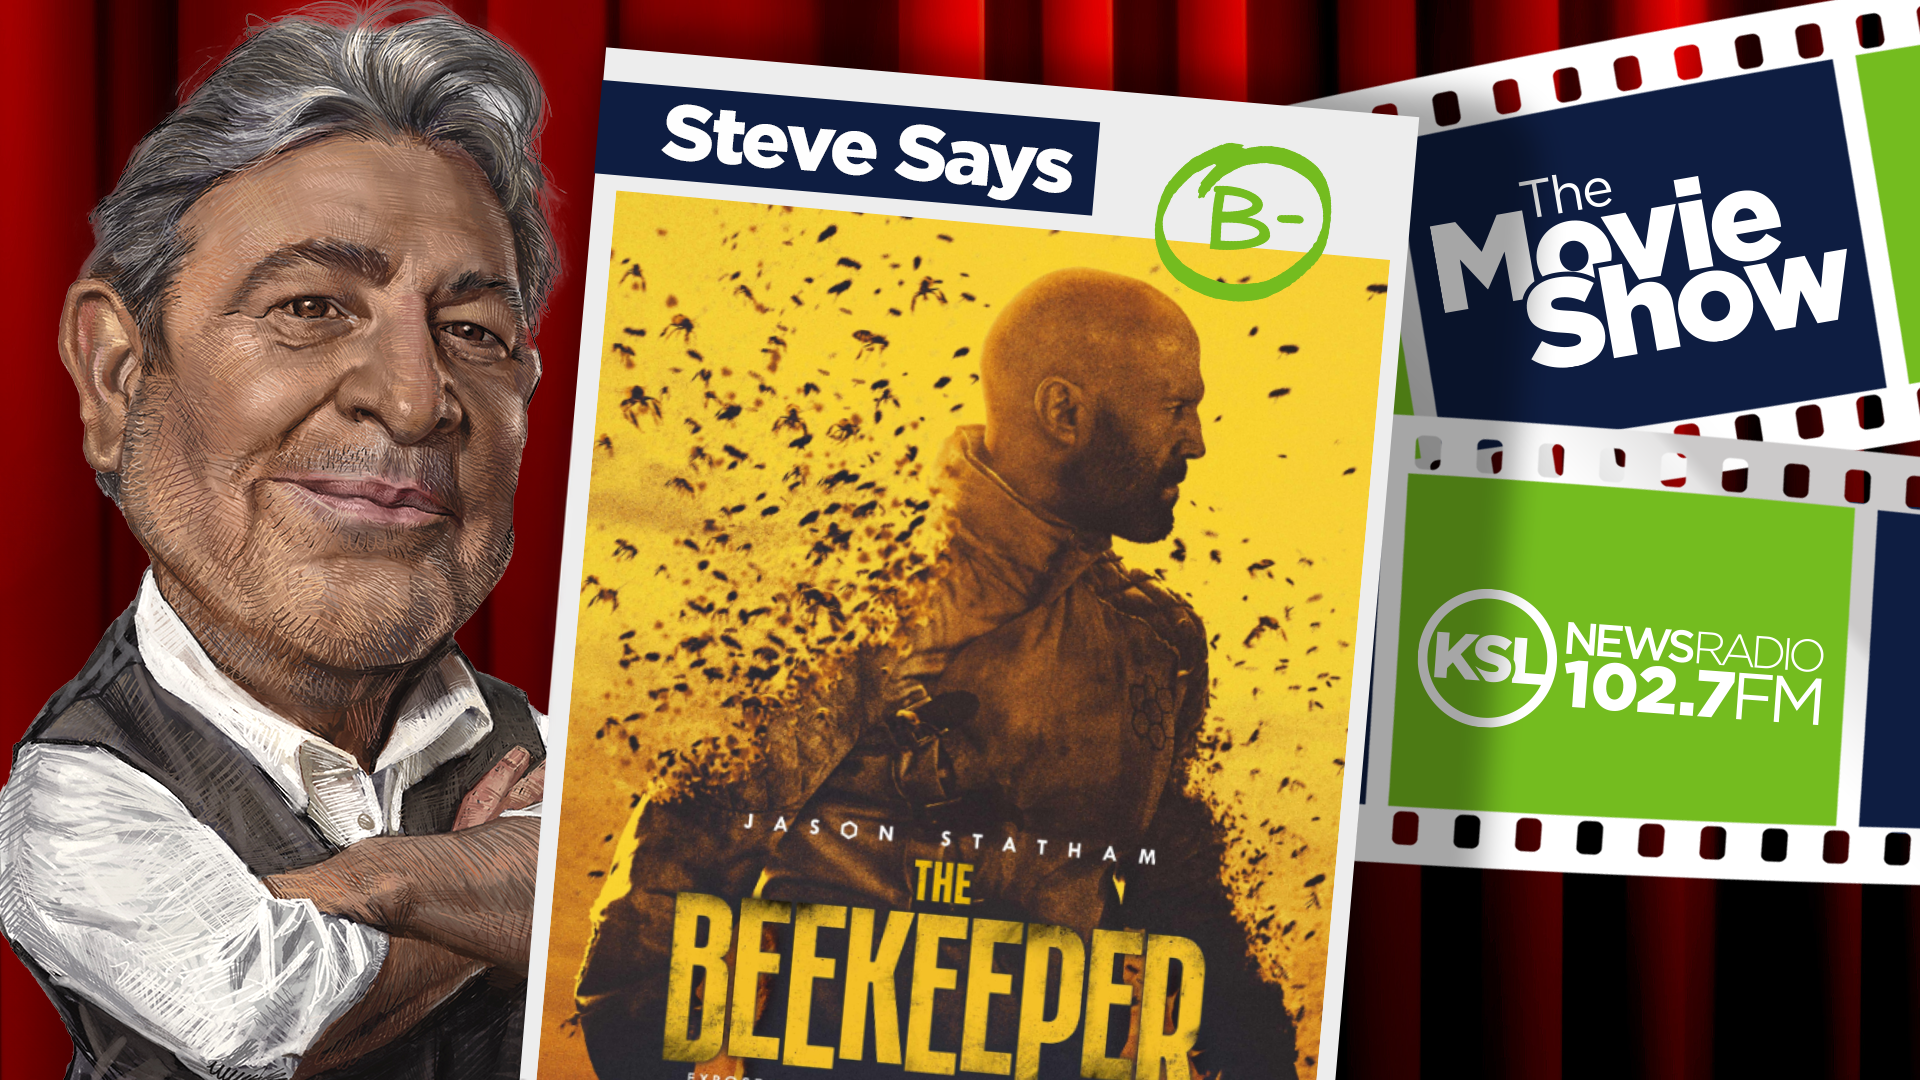 ksl movie show review, the beekeeper poster...